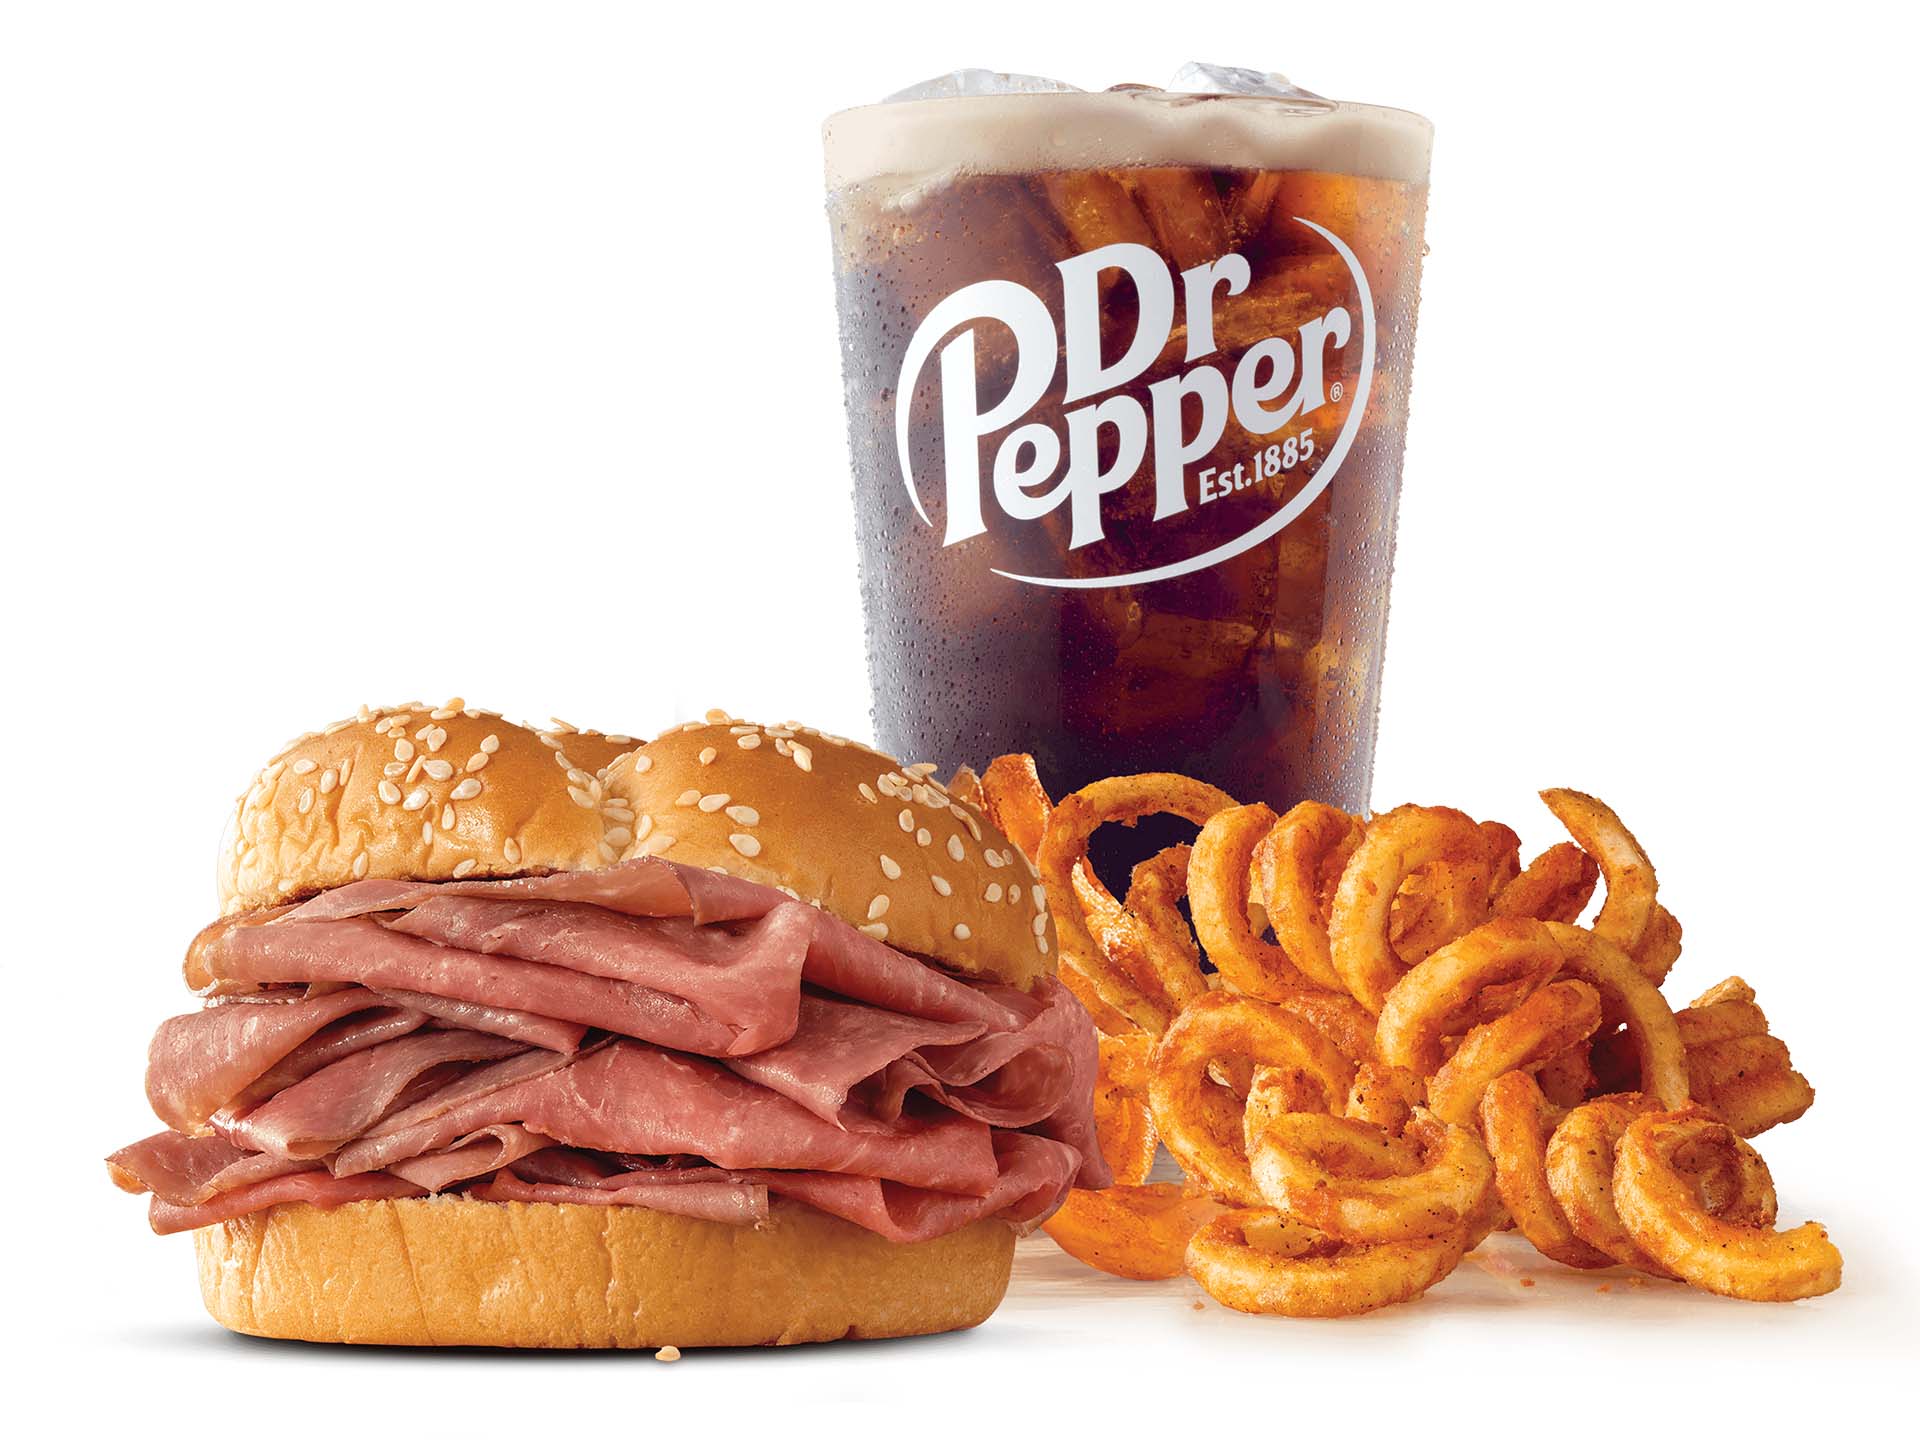 Arby's classic roast beef meal in Peachtree Corners, GA